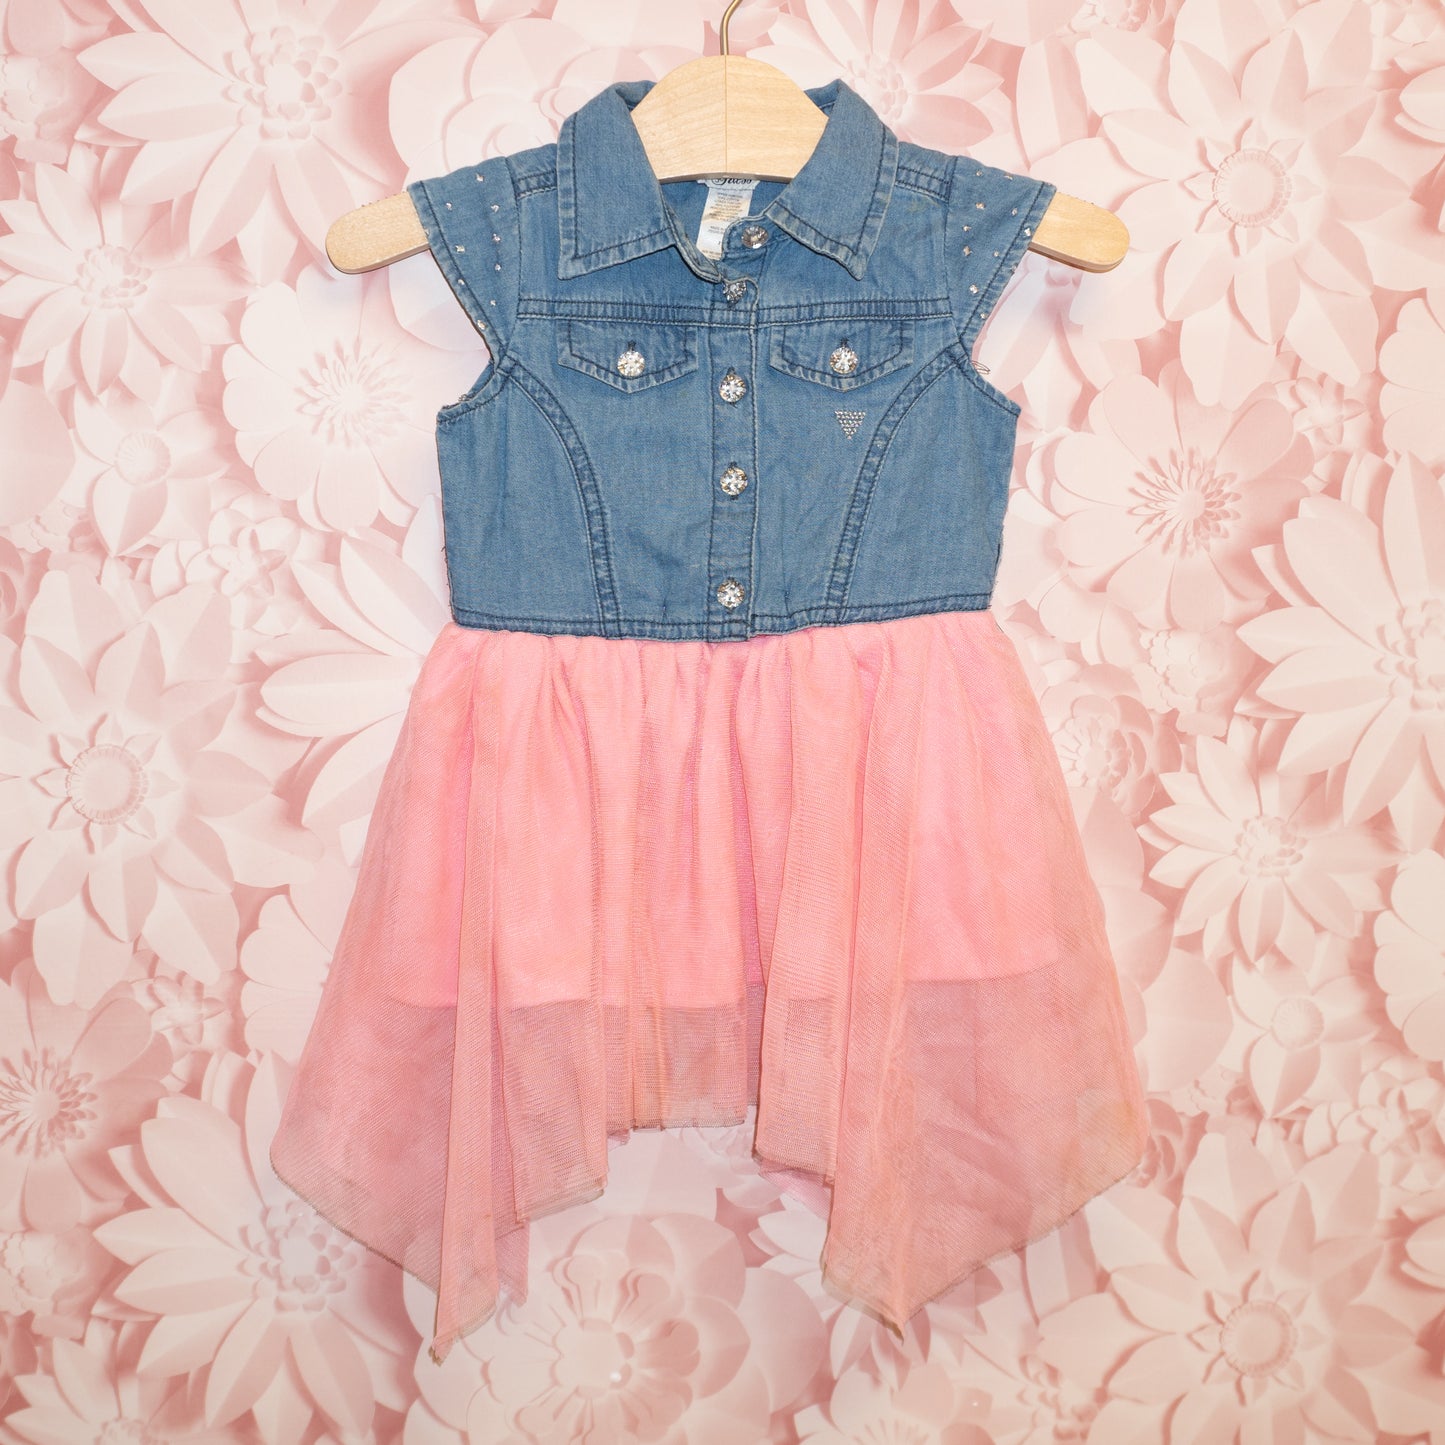 Denim and Tulle Dress Size 2